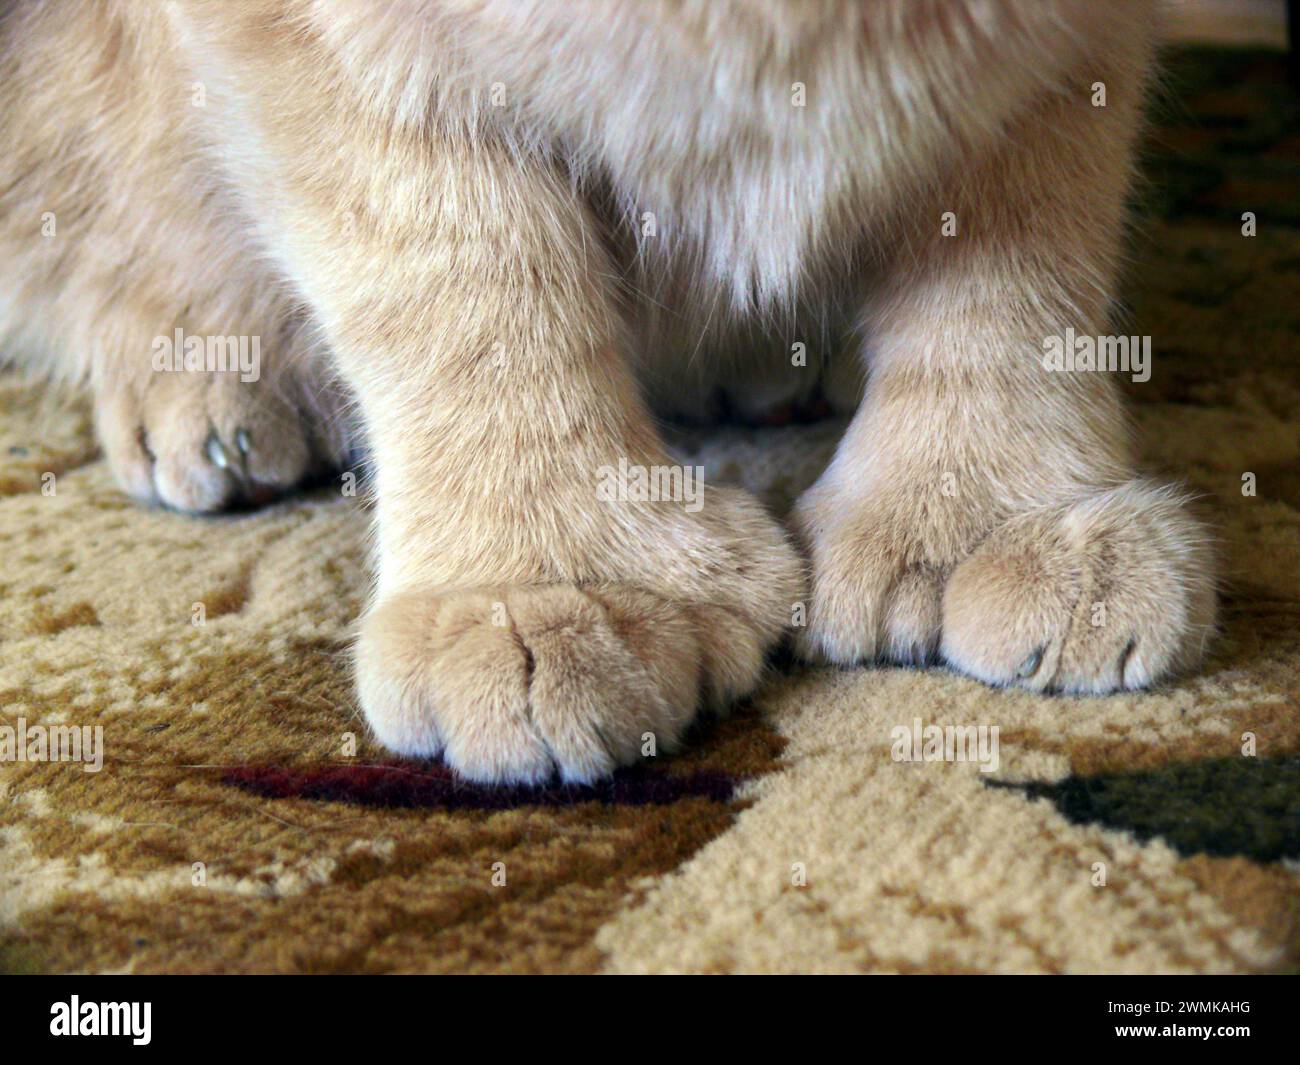 Polydactyl Mittens Paws Stock Photo